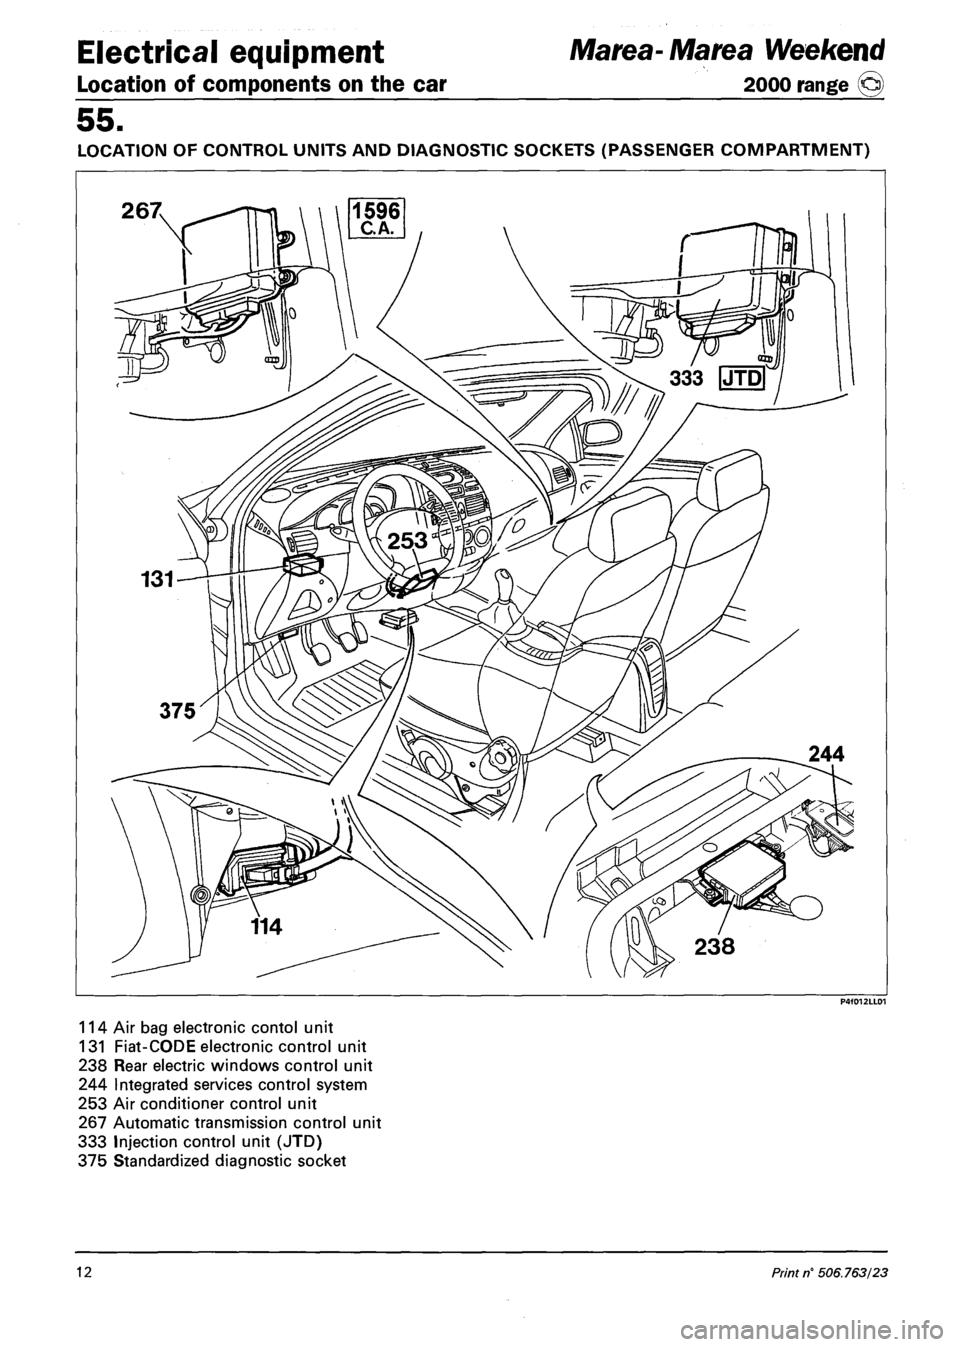 FIAT MAREA 2000 1.G Service Manual Electrical equipment Marea-Marea Weekend 
Location of components on the car 2000 range © 
55. 
LOCATION OF CONTROL UNITS AND DIAGNOSTIC SOCKETS (PASSENGER COMPARTMENT) 
P4f012LL01 
114 Air bag electr